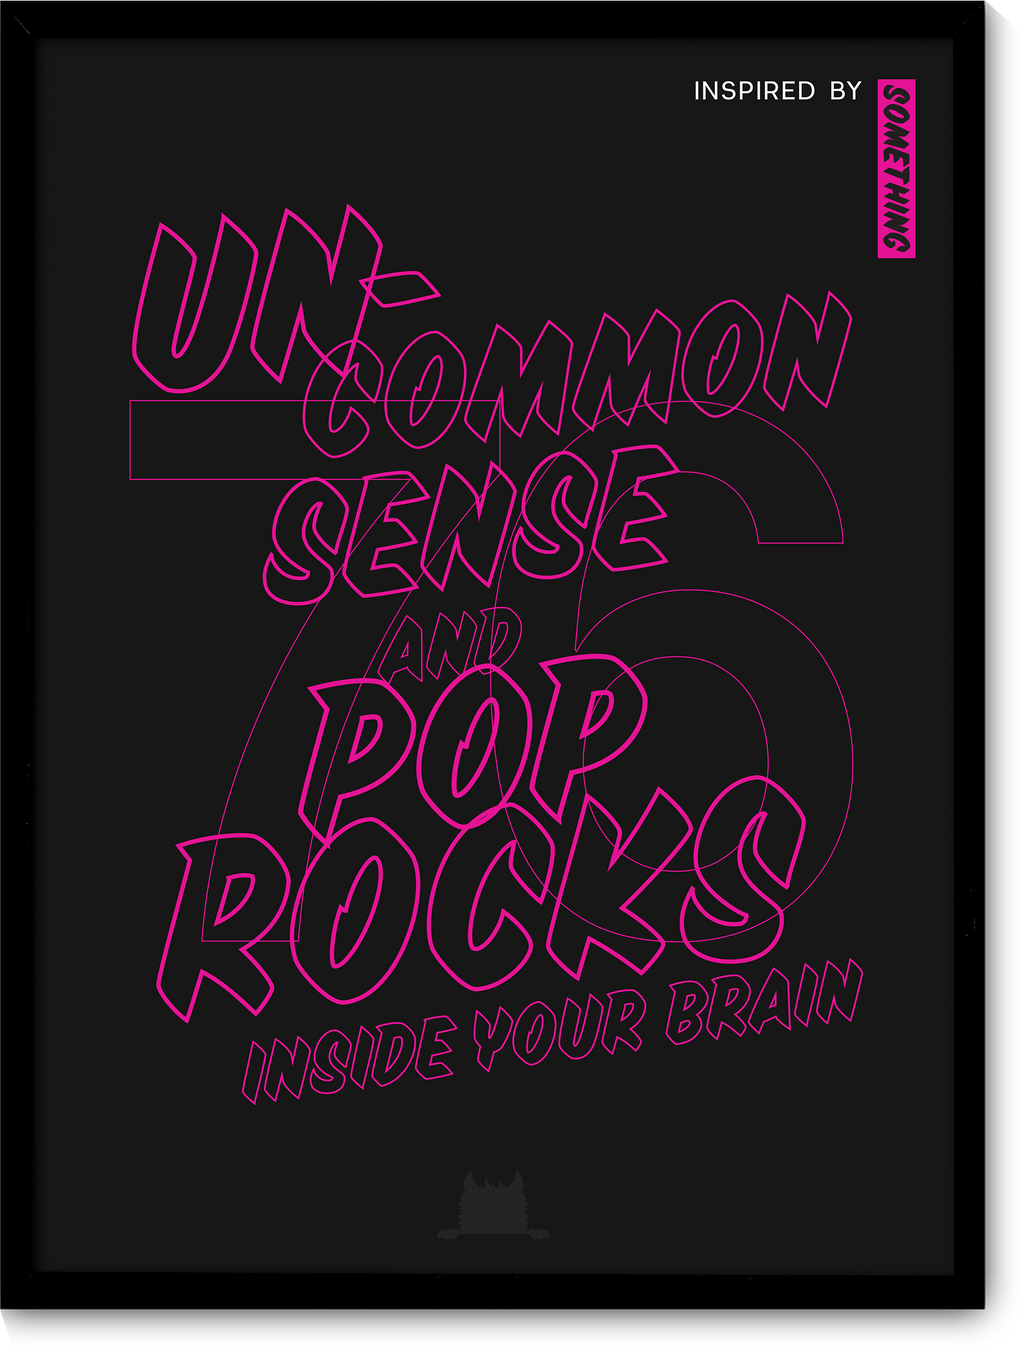 #76 Inspired by uncommon sense and pop rocks inside your brain.